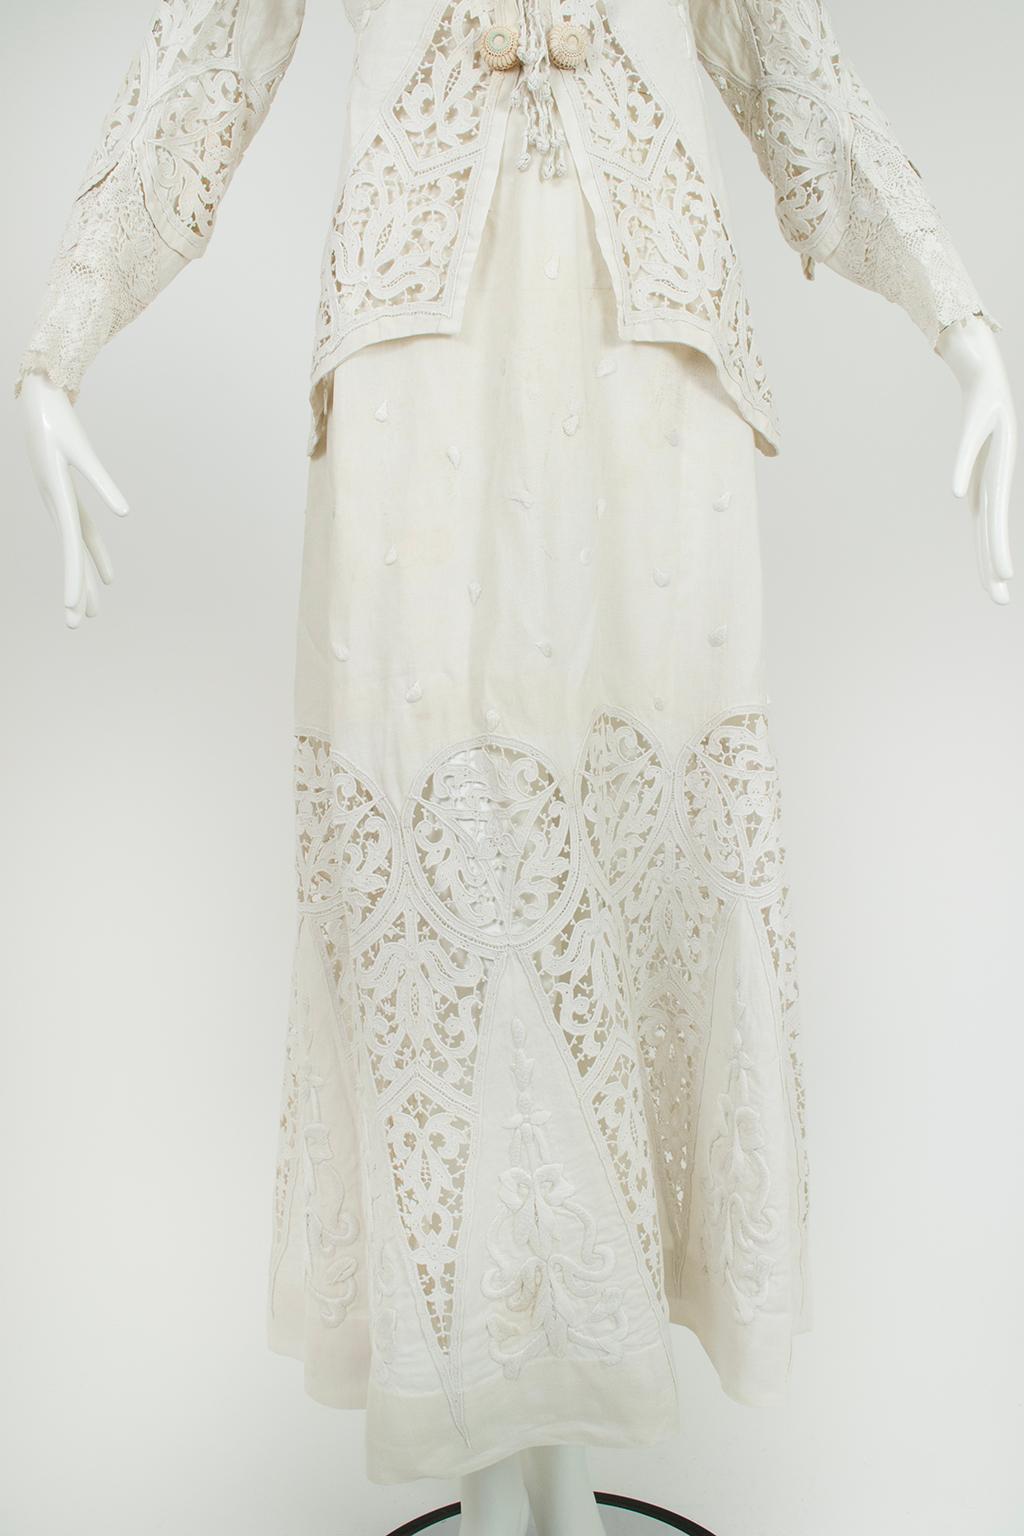 Edwardian White Irish Crochet and Cotton Walking or Wedding Suit – L, 1900s For Sale 7